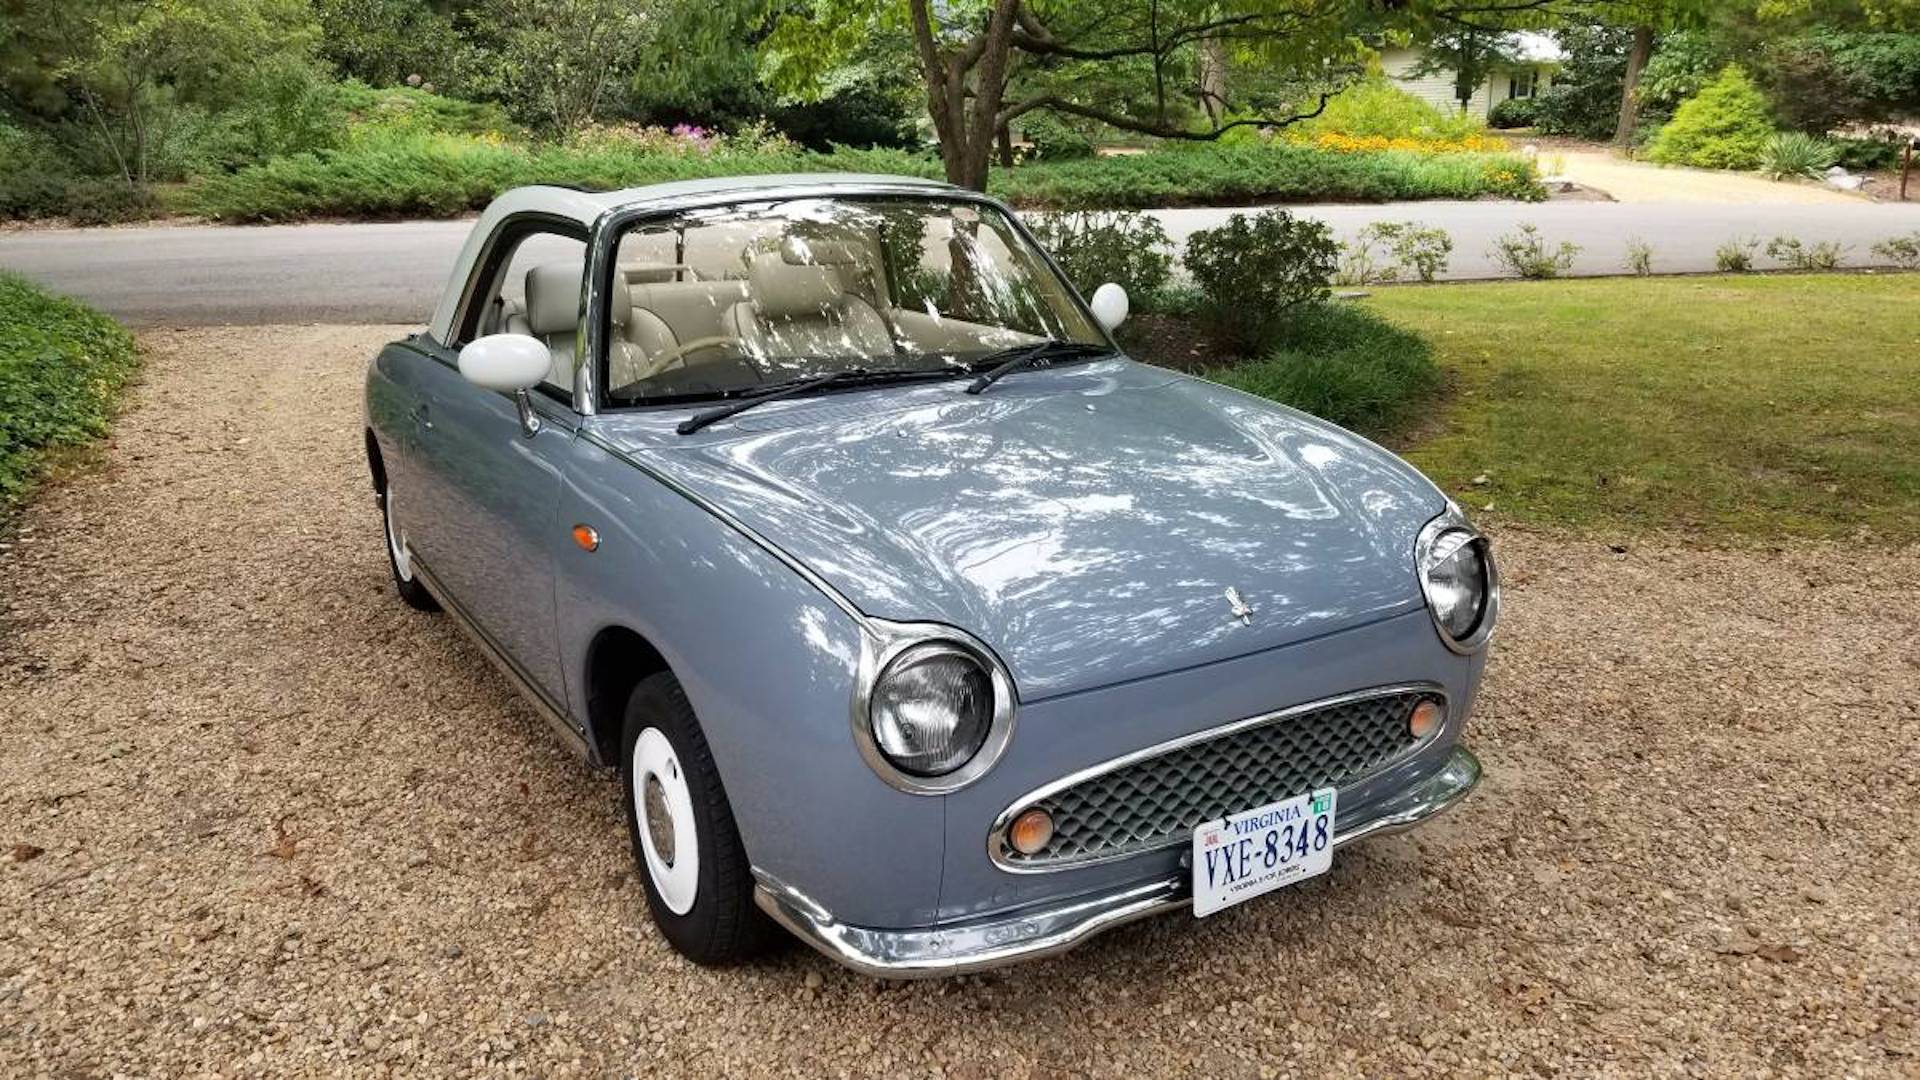 There's an Adorable Nissan Figaro Import For Sale in Virginia